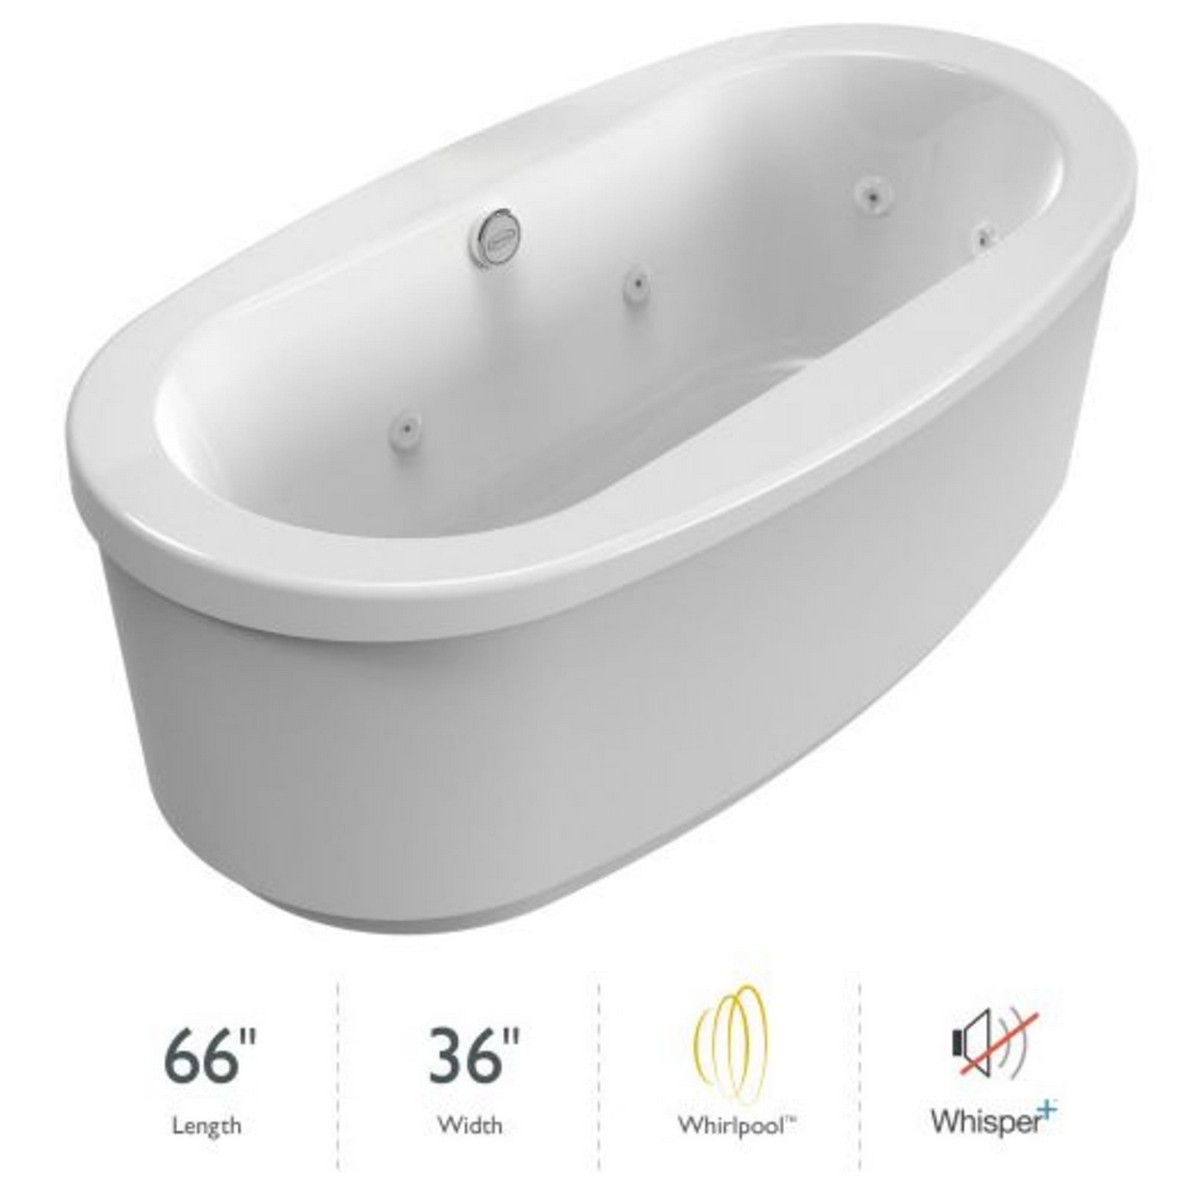 JACUZZI INF6636WCR1XPW INIZIO 65 1/2 X 35 5/8 INCH FREESTANDING ACRYLIC WHIRLPOOL WITH WHISPER TECHNOLOGY IN WHITE